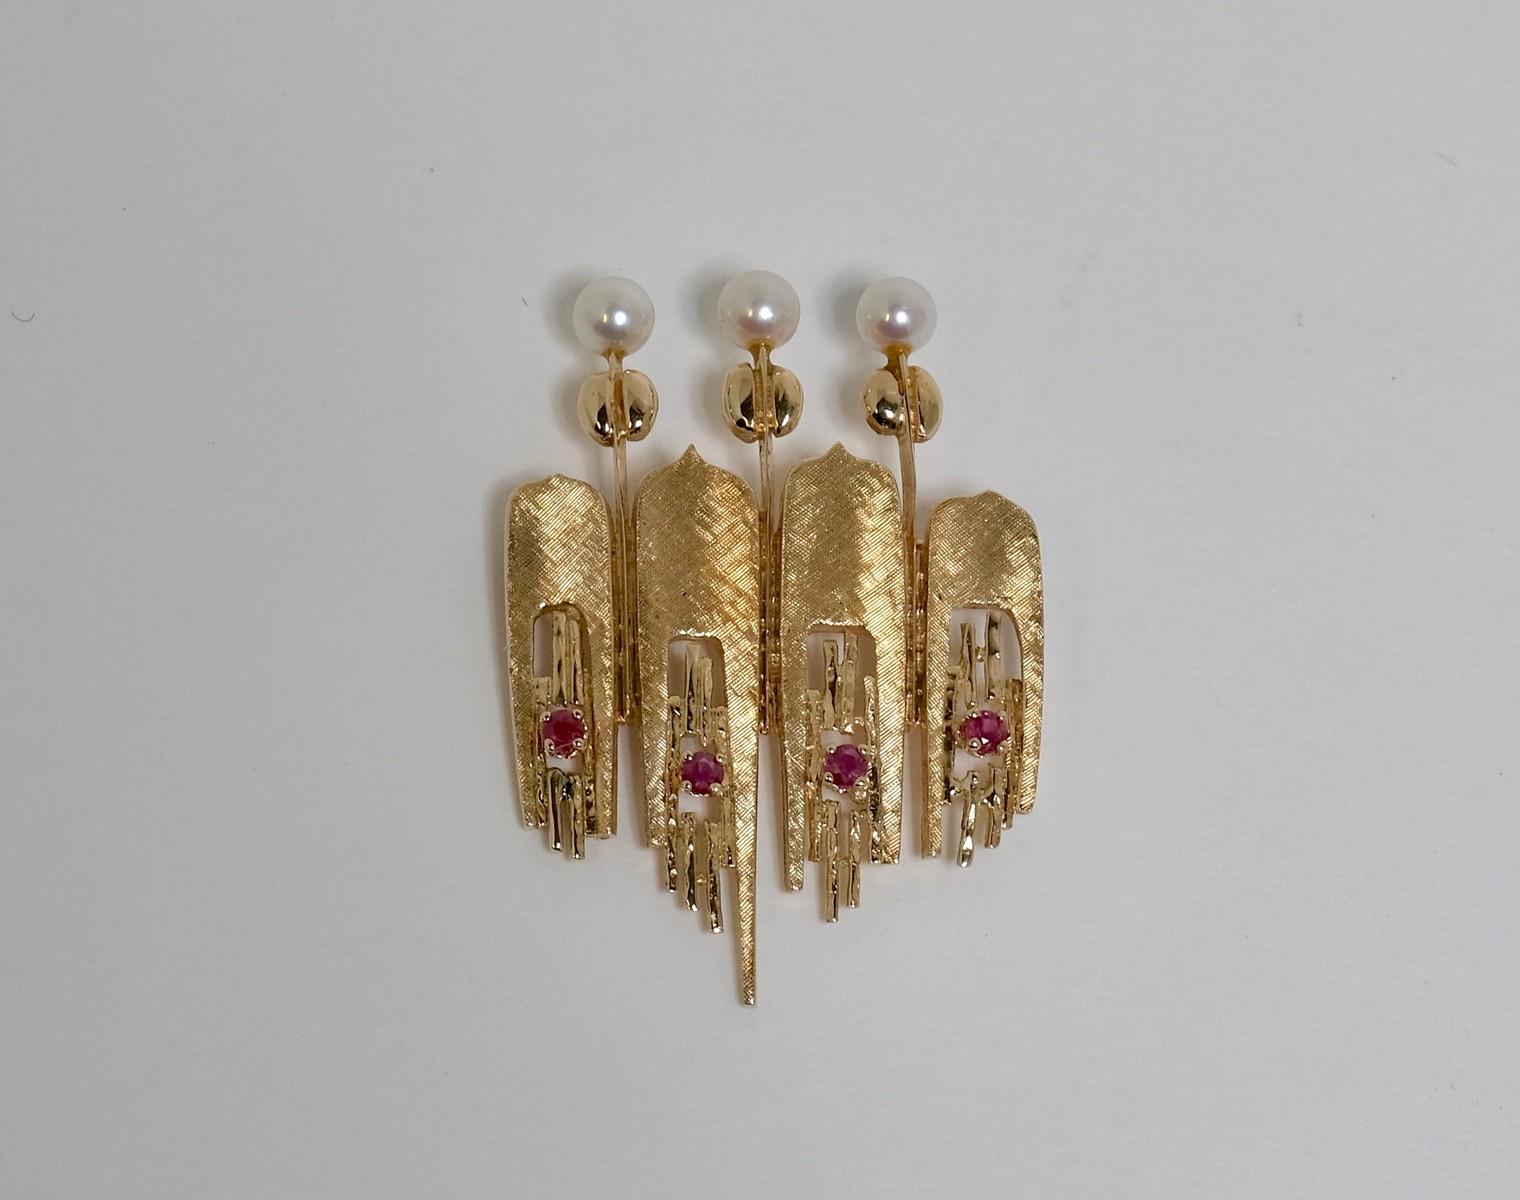 14K GOLD BROOCH | OLD TOWN HALL AUCTION: FINE JEWELLERY, WATCHES ...